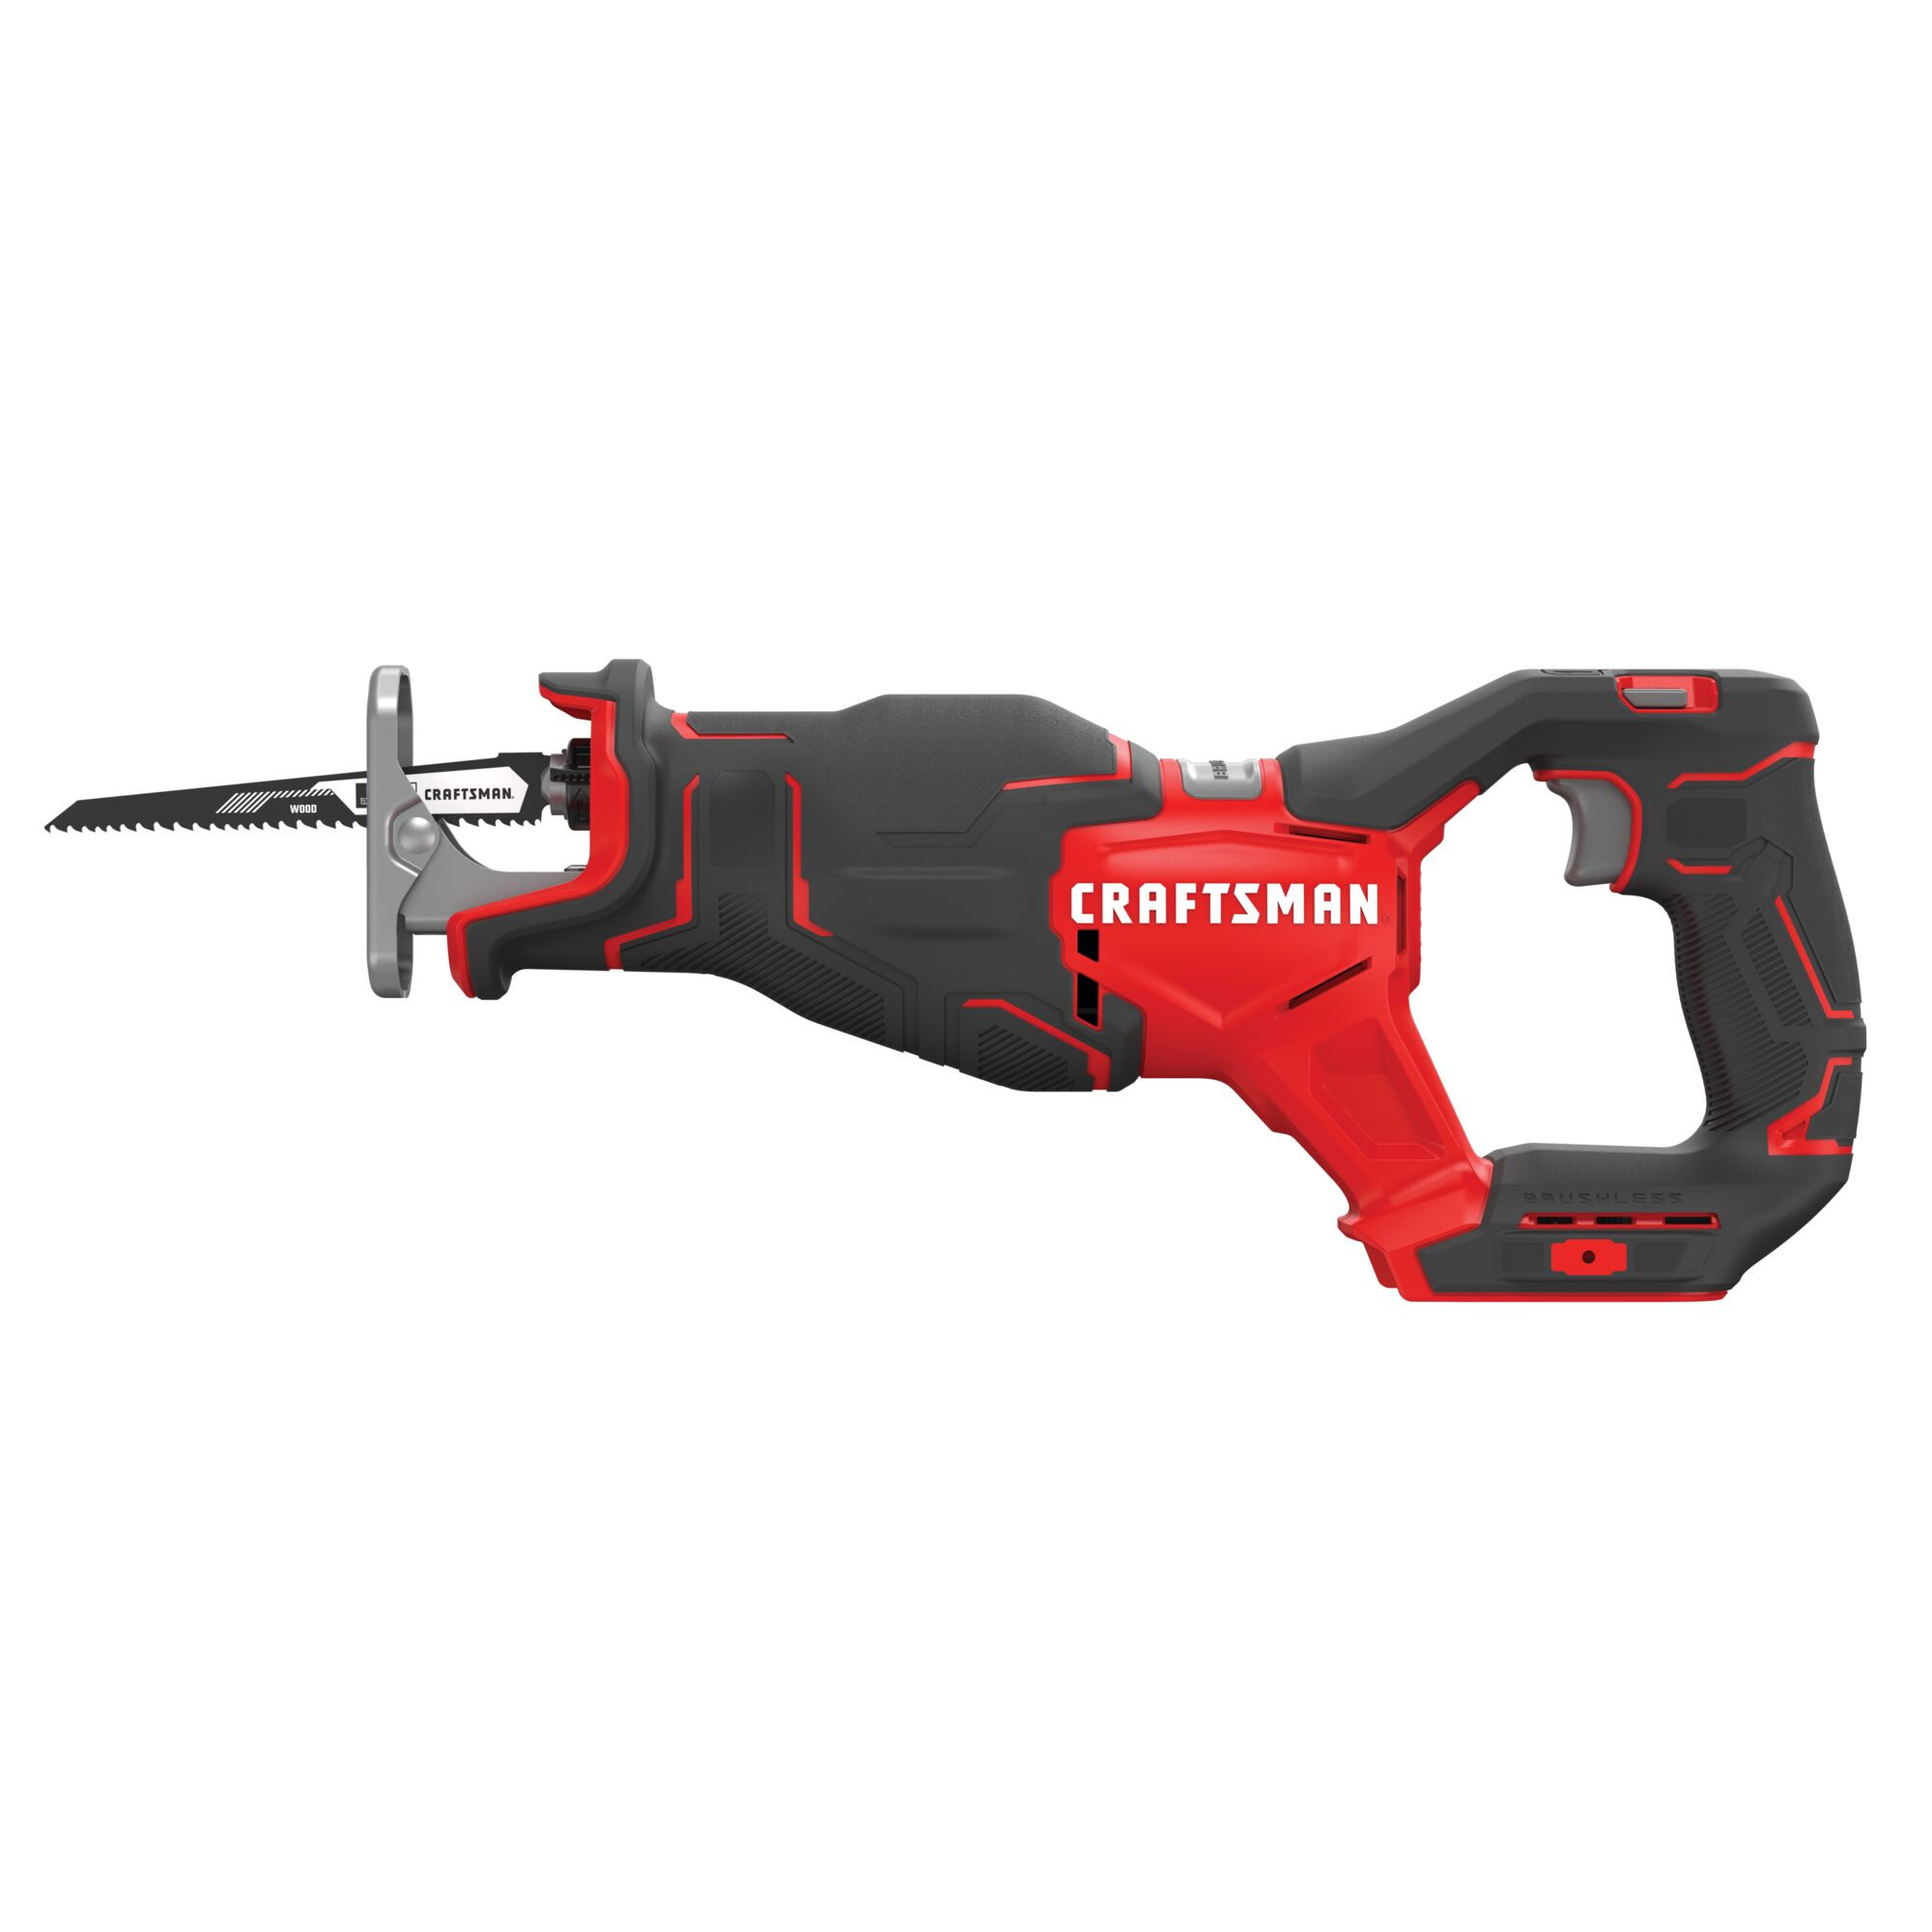 View of CRAFTSMAN Reciprocating Saw on white background